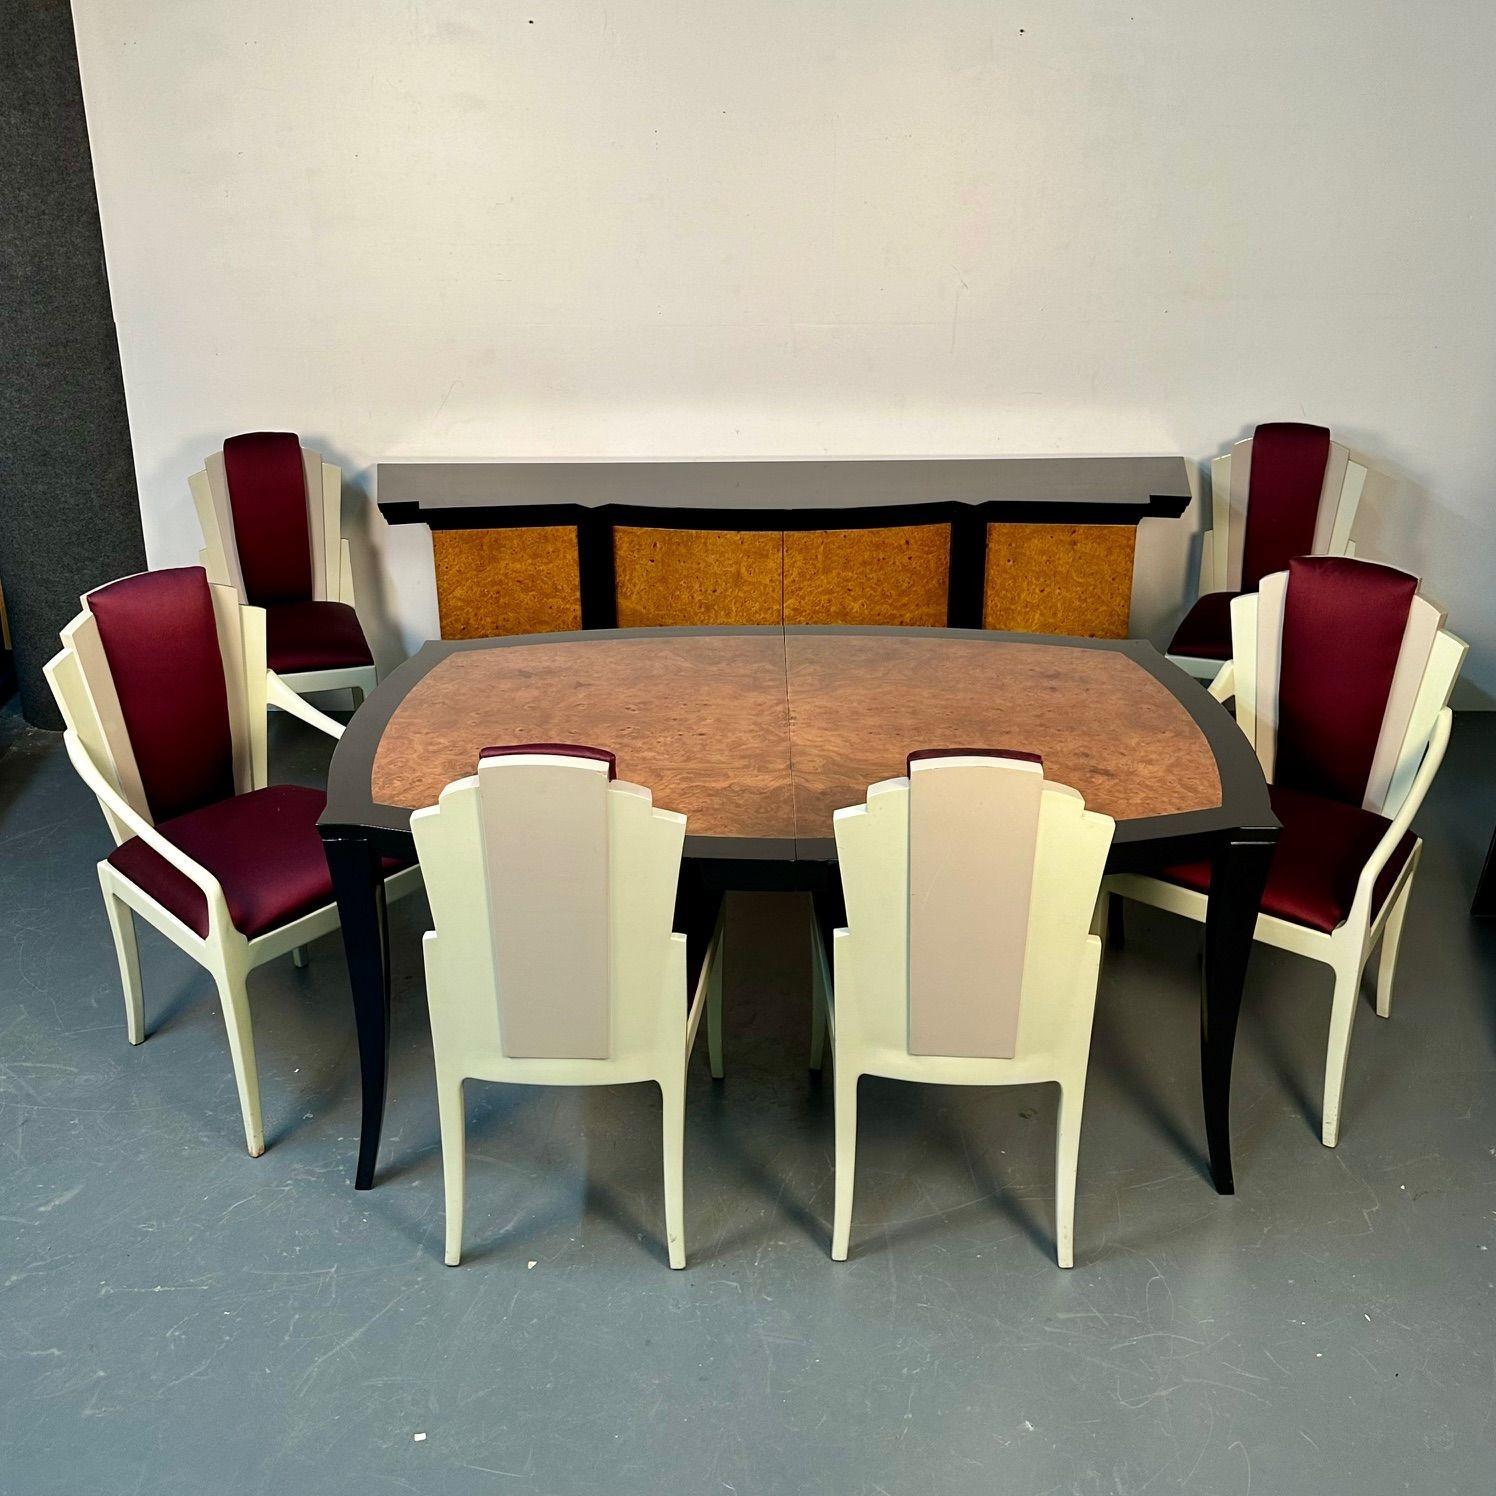 Vladimir Kagan (American, 1927-2016) Eva Dining Room Set, Vladimir Kagan Designs, Inc., USA, circa 1983

Pieces can be purchased separately. Please inquire for separate pricing.

Provenance: Property from the Personal Collection of Vladimir